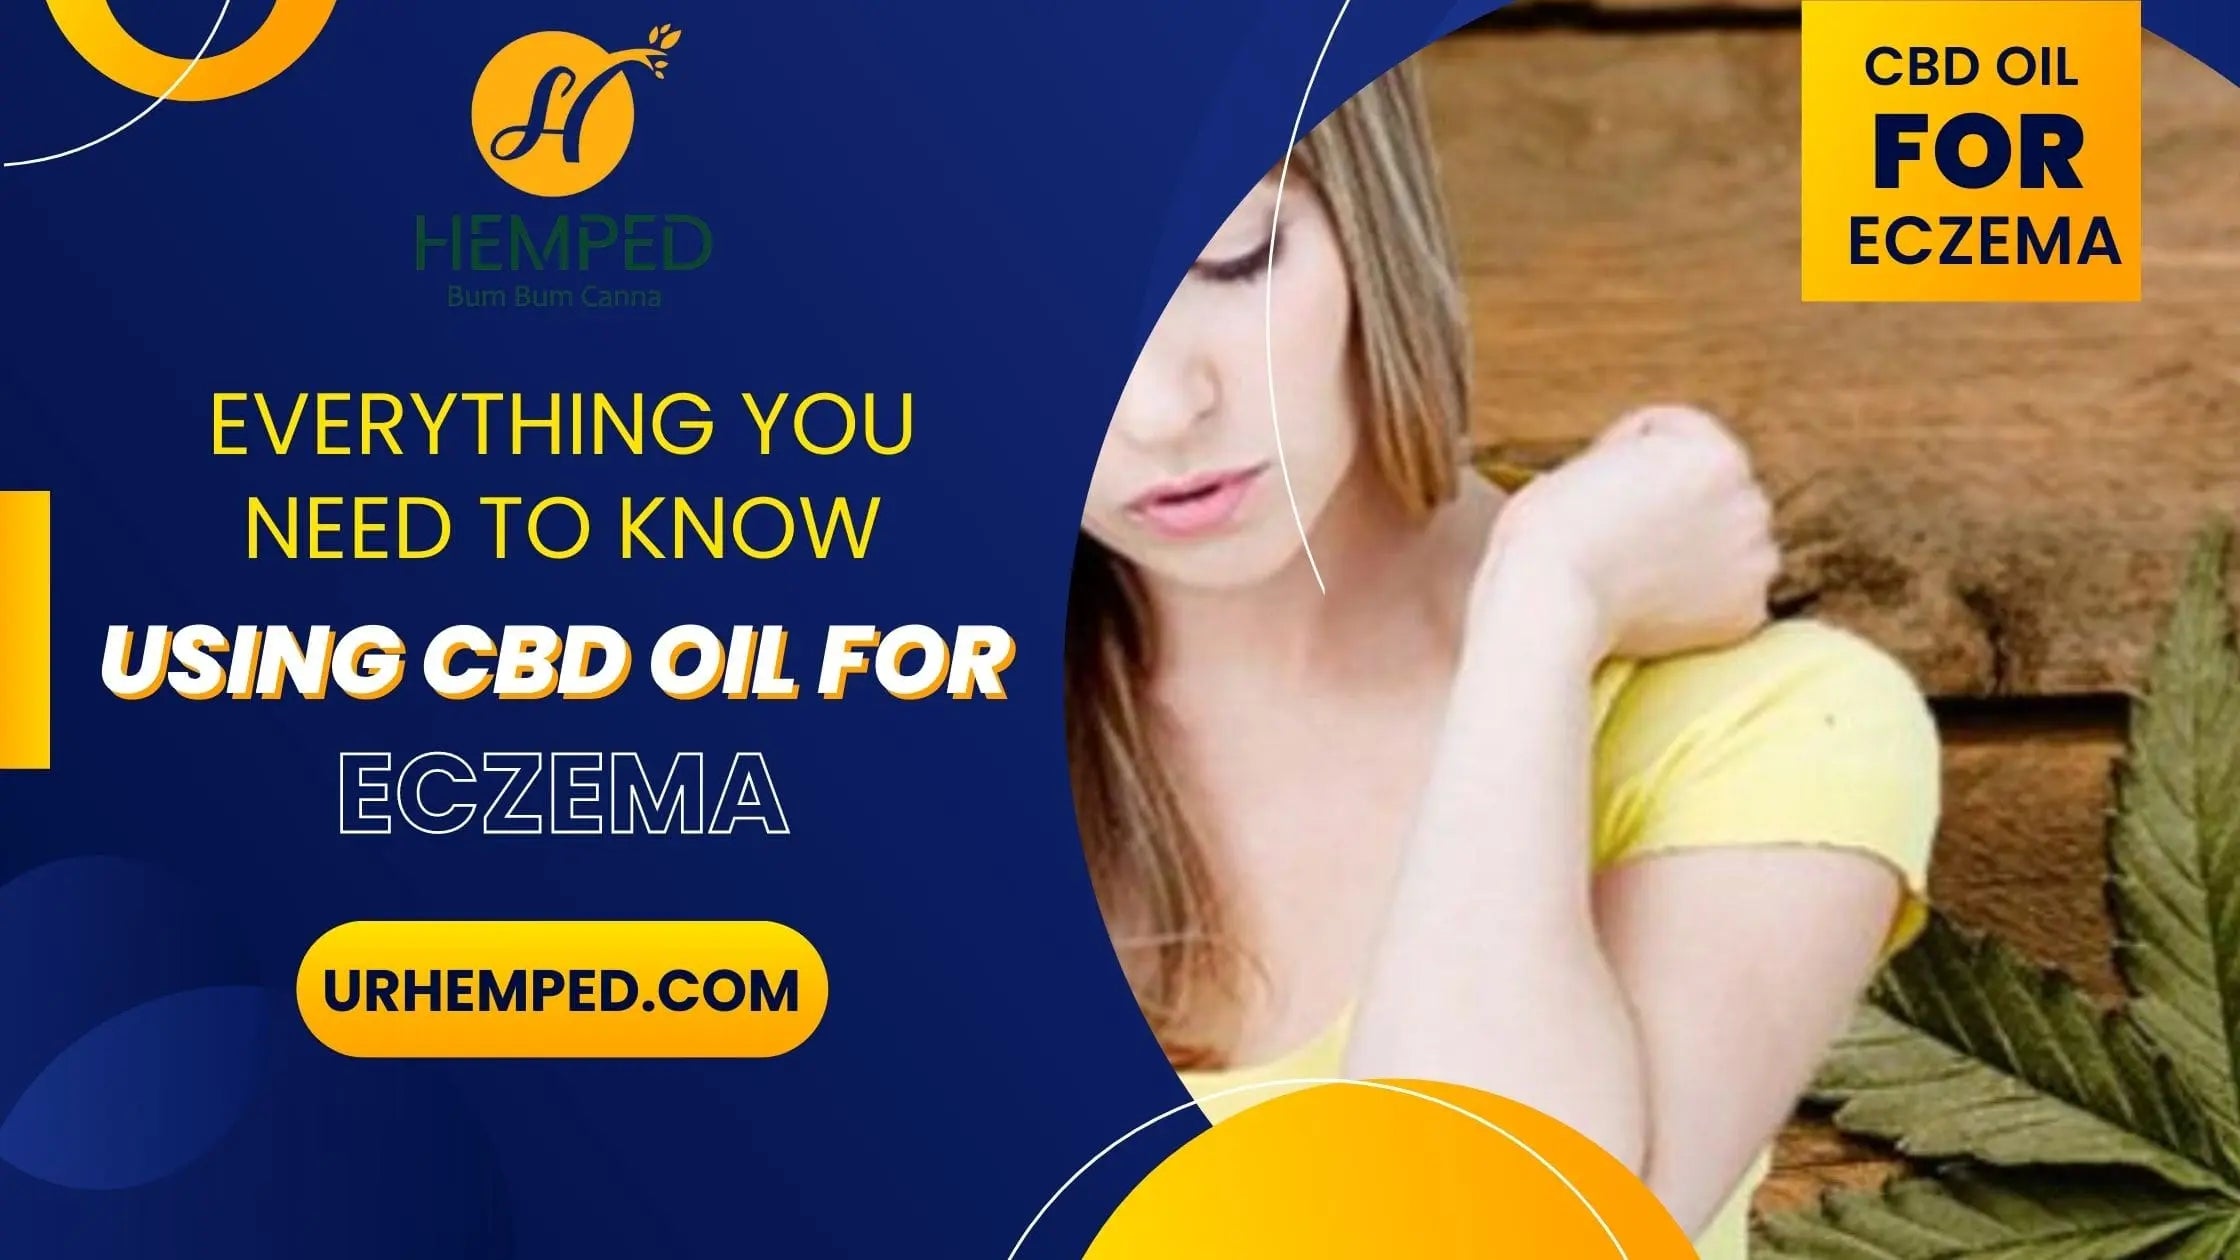 Everything You Need To Know About Using CBD Oil For Eczema